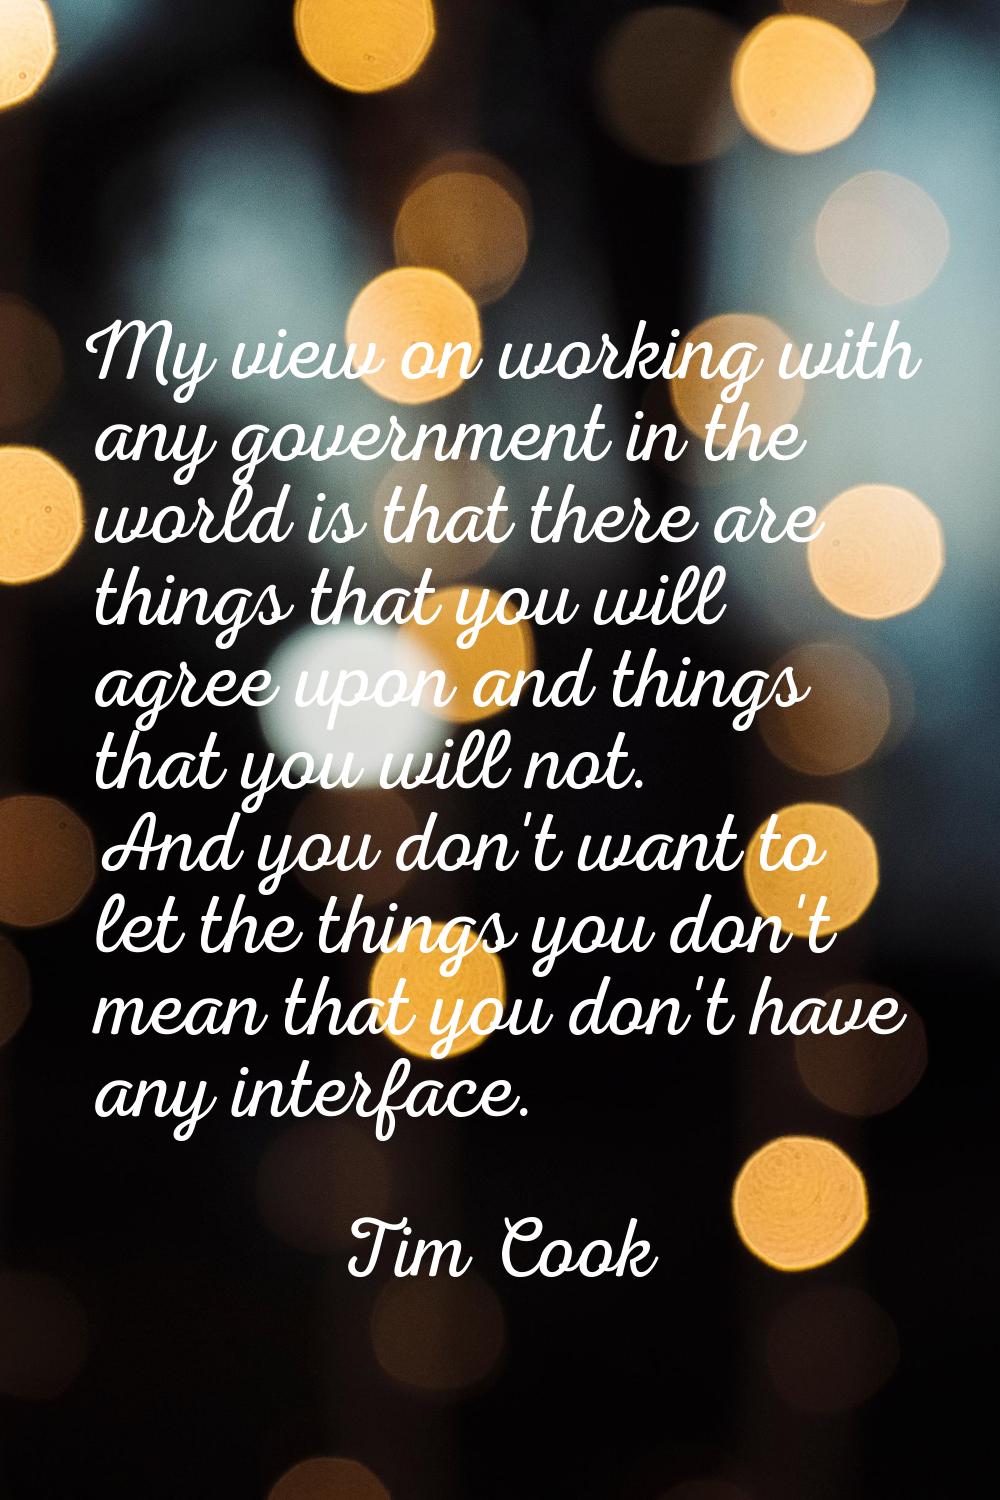 My view on working with any government in the world is that there are things that you will agree up